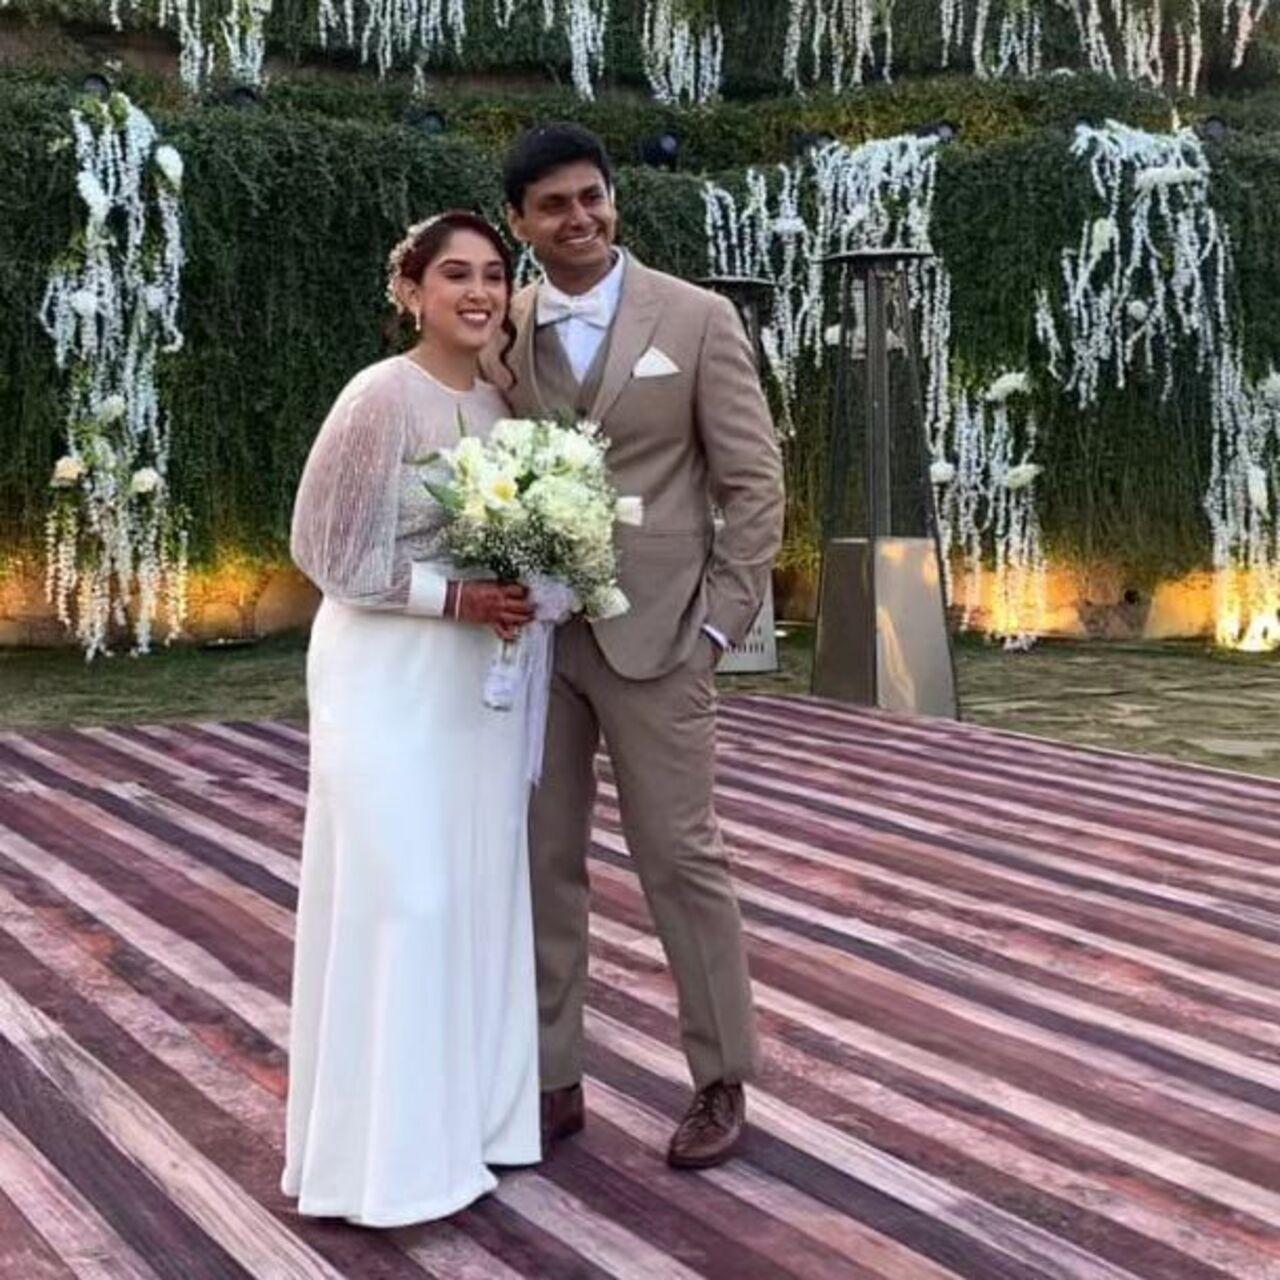 Ira looked beautiful as she opted for a white gown for her intimate wedding ceremony, while Nupur looked handsome in a beige suit